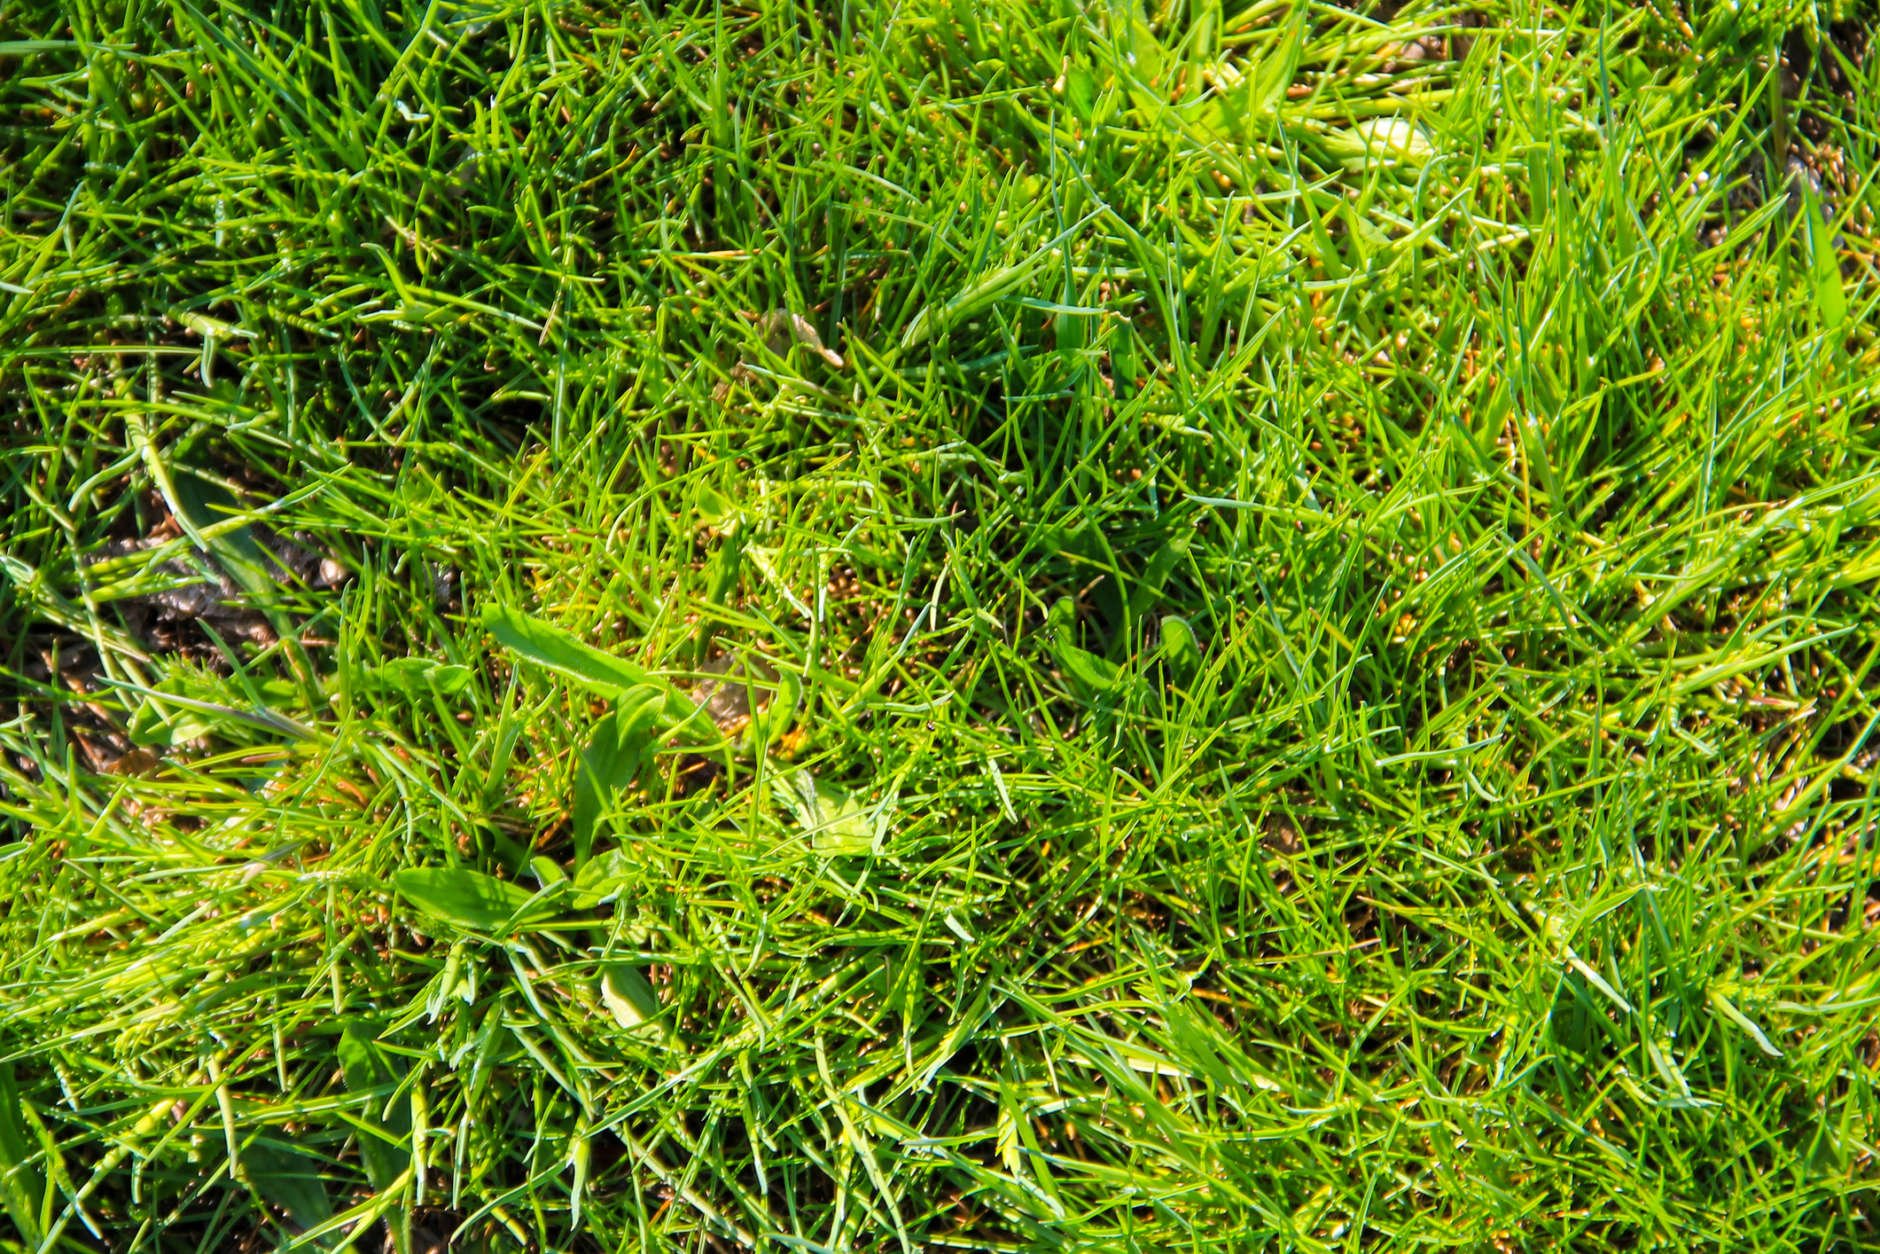 Some people choose electric mowers because they're environmentally conscious and want to reduce their carbon footprints. But benefits extend beyond the obvious. (Thinkstock)